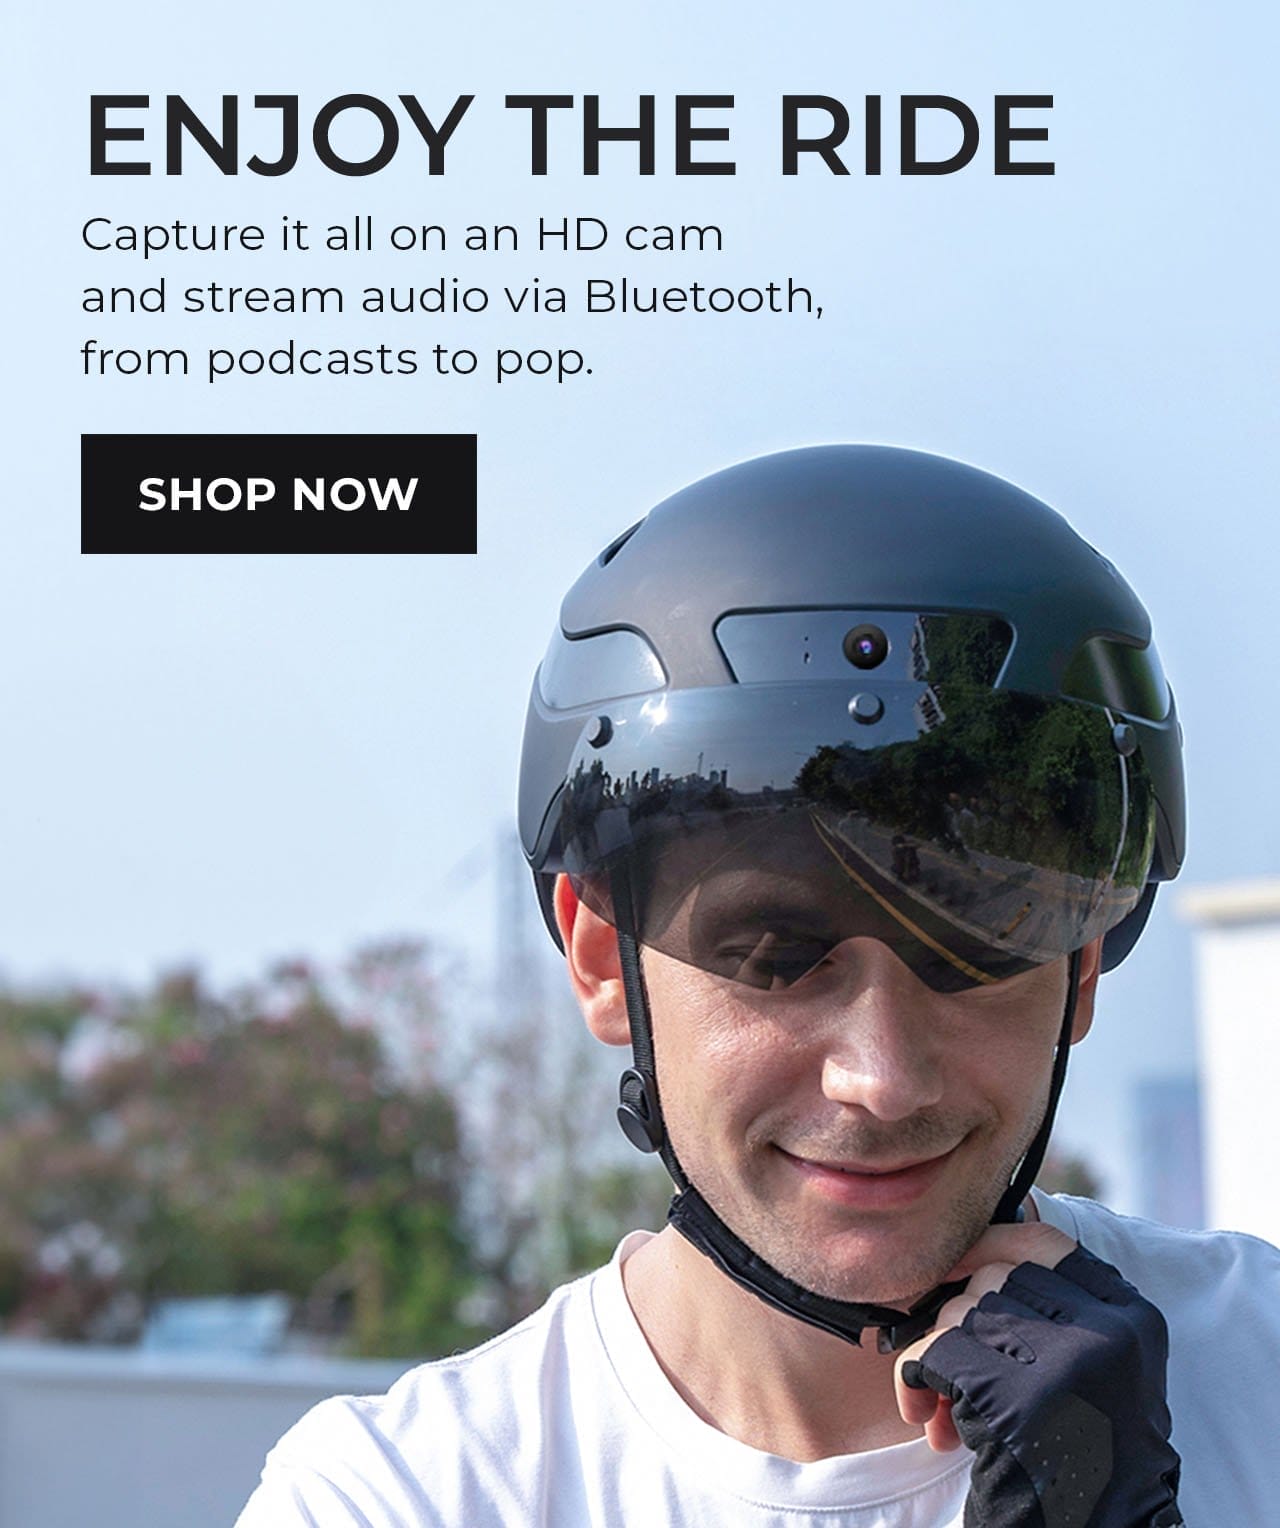  Smart Bike Helmet with Speakers and Camera | SHOP NOW